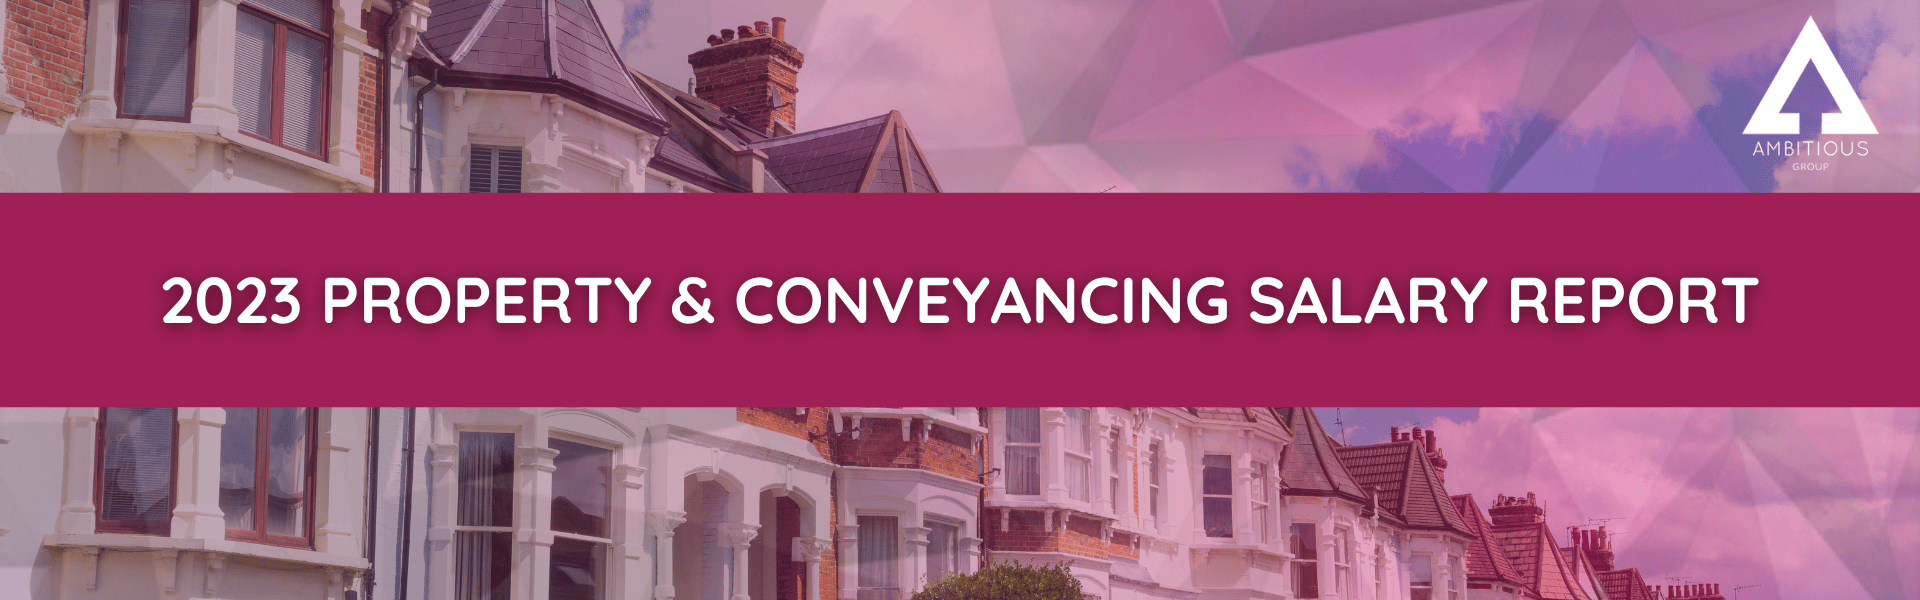 Property Conveyancing Salary Guide Image